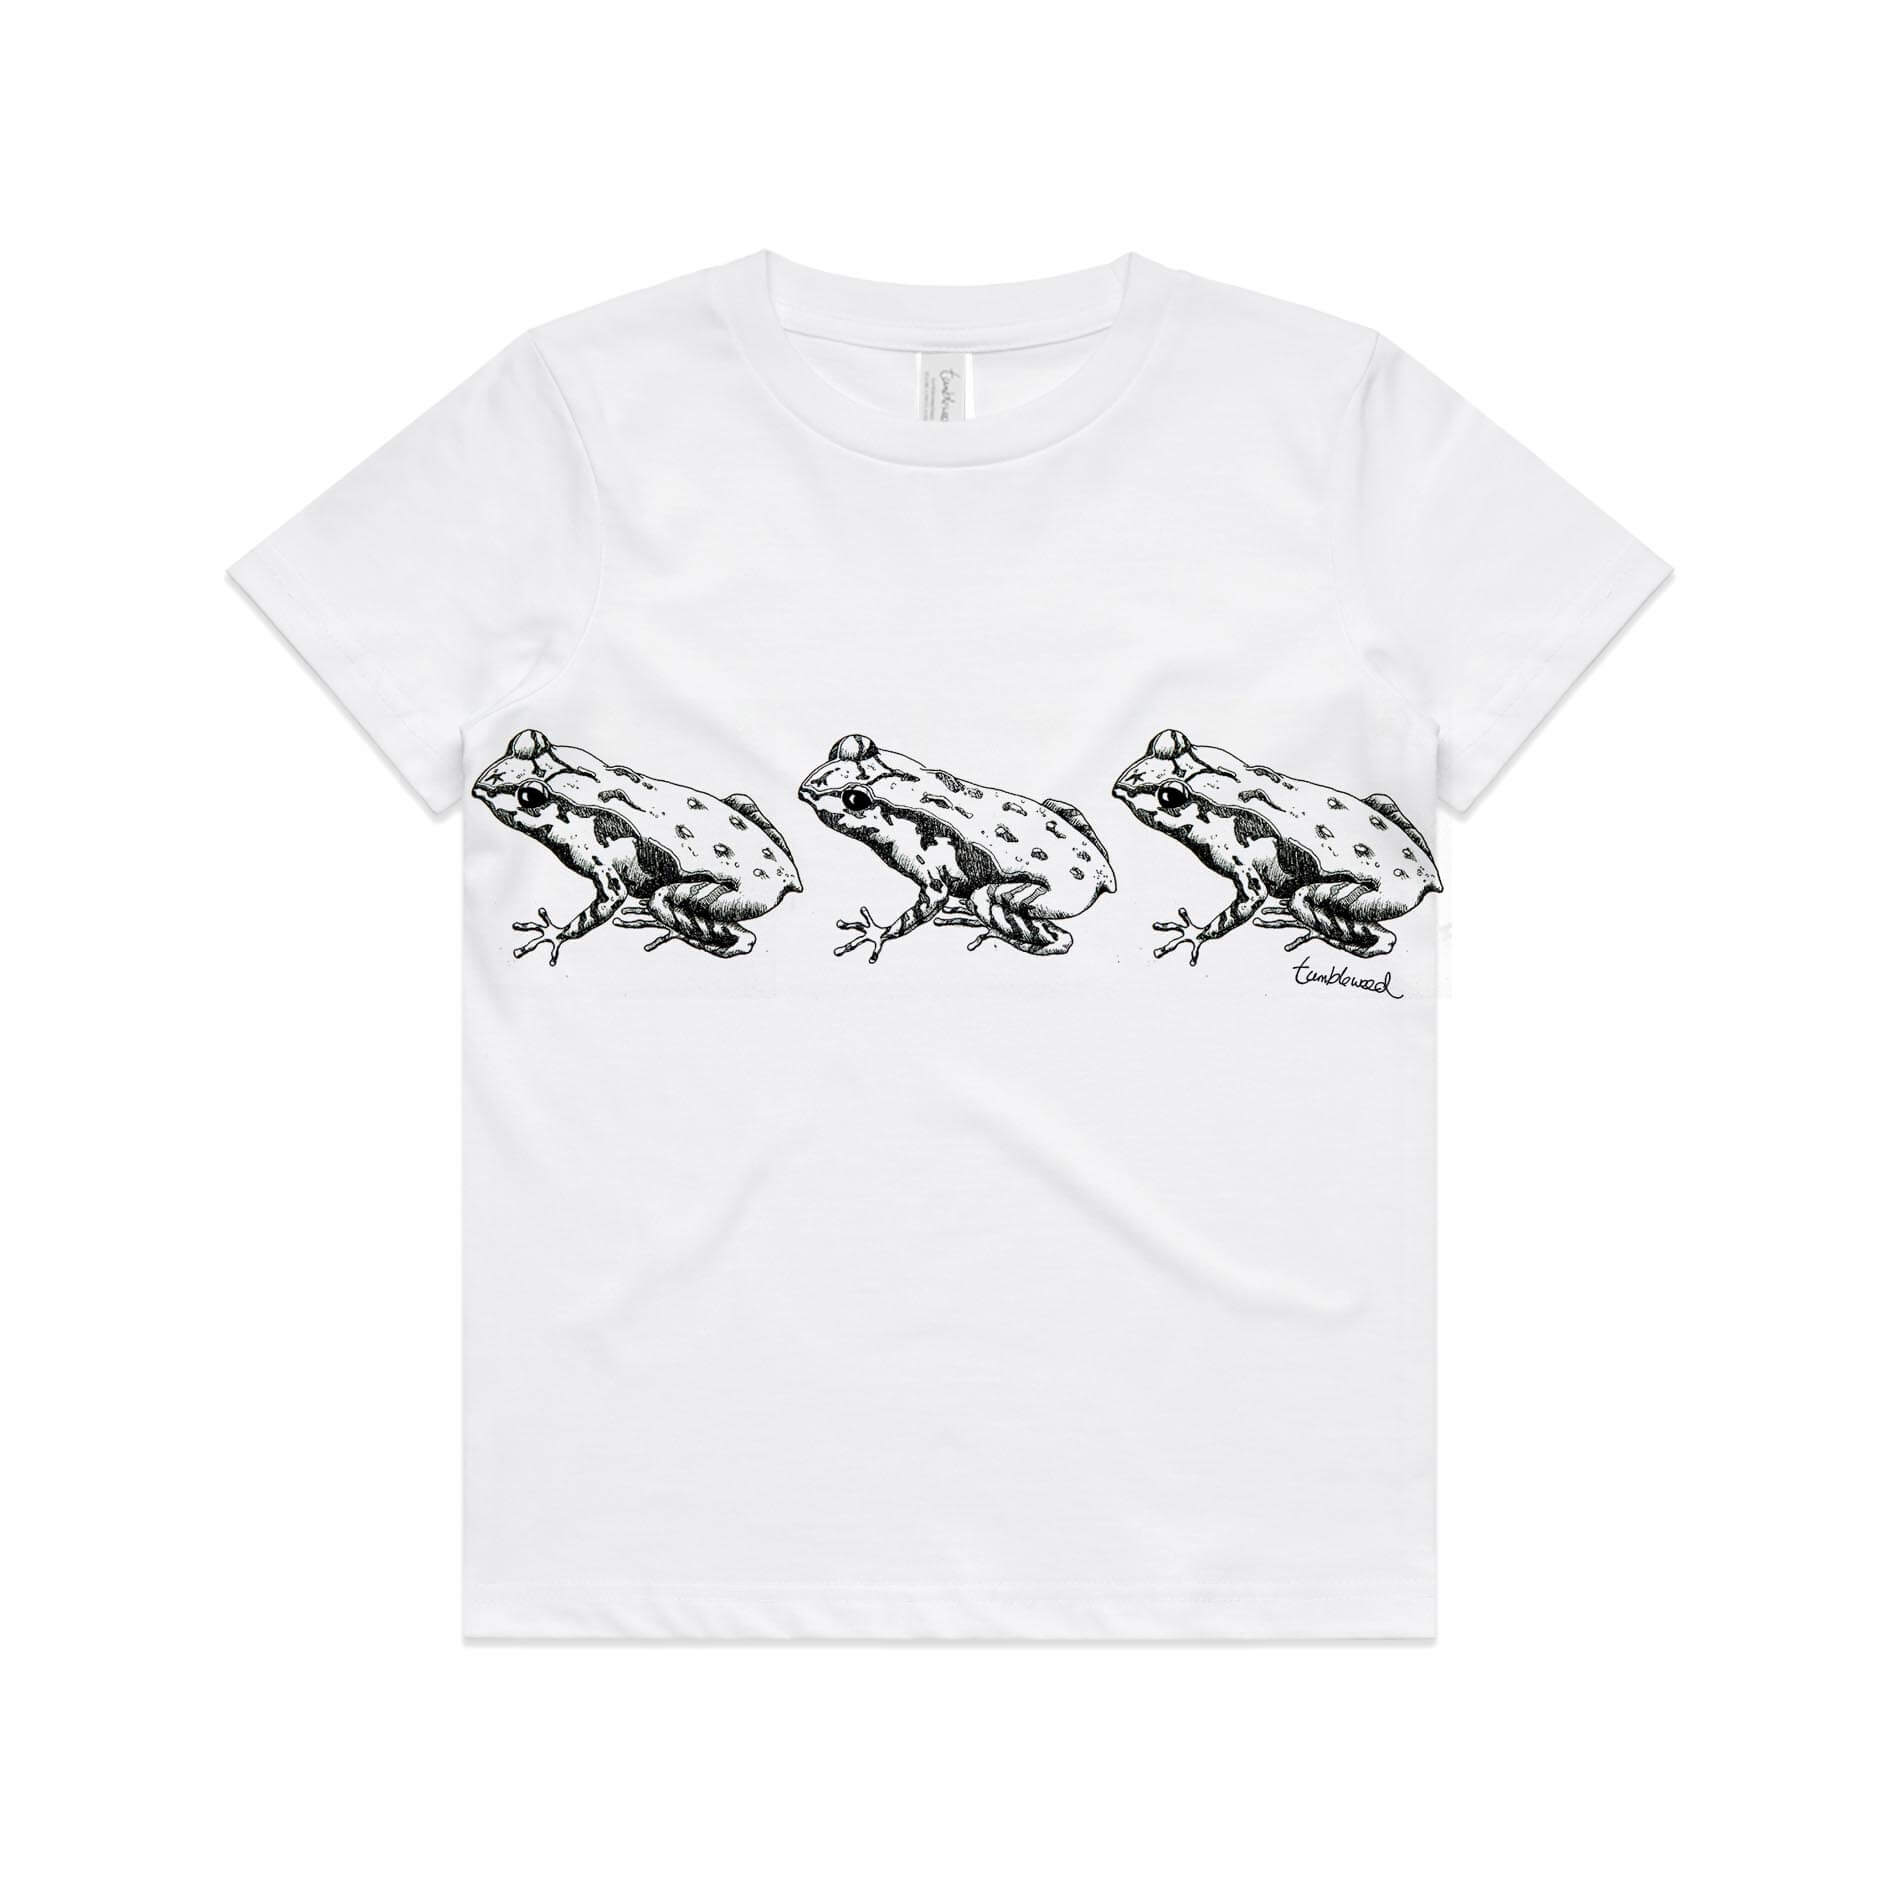 White, cotton kids' t-shirt with screen printed Kids Archey's Frog design.